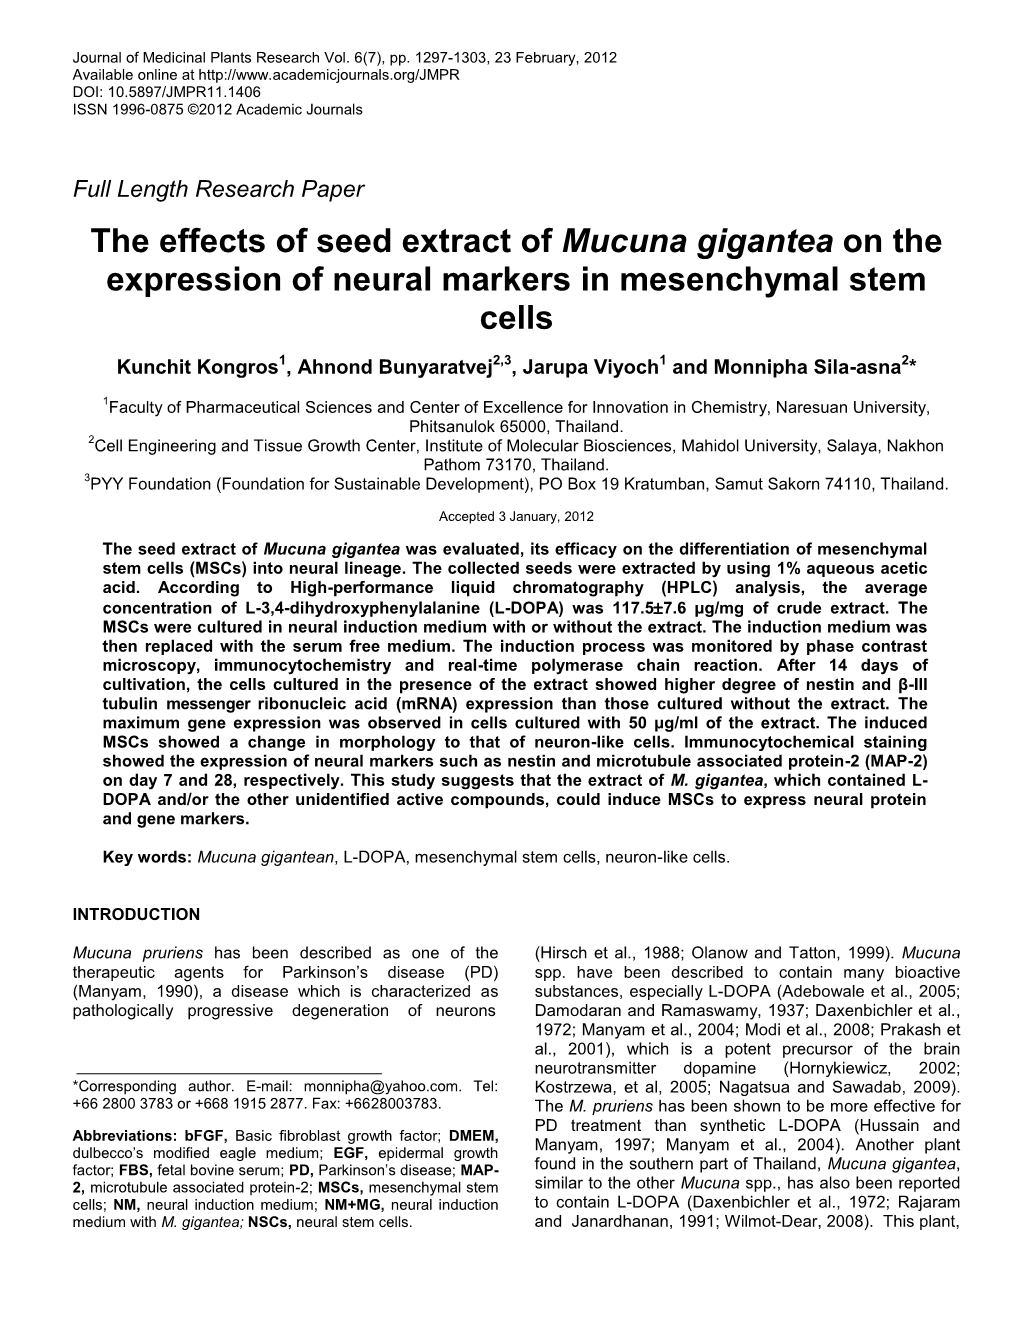 The Effects of Seed Extract of Mucuna Gigantea on the Expression of Neural Markers in Mesenchymal Stem Cells